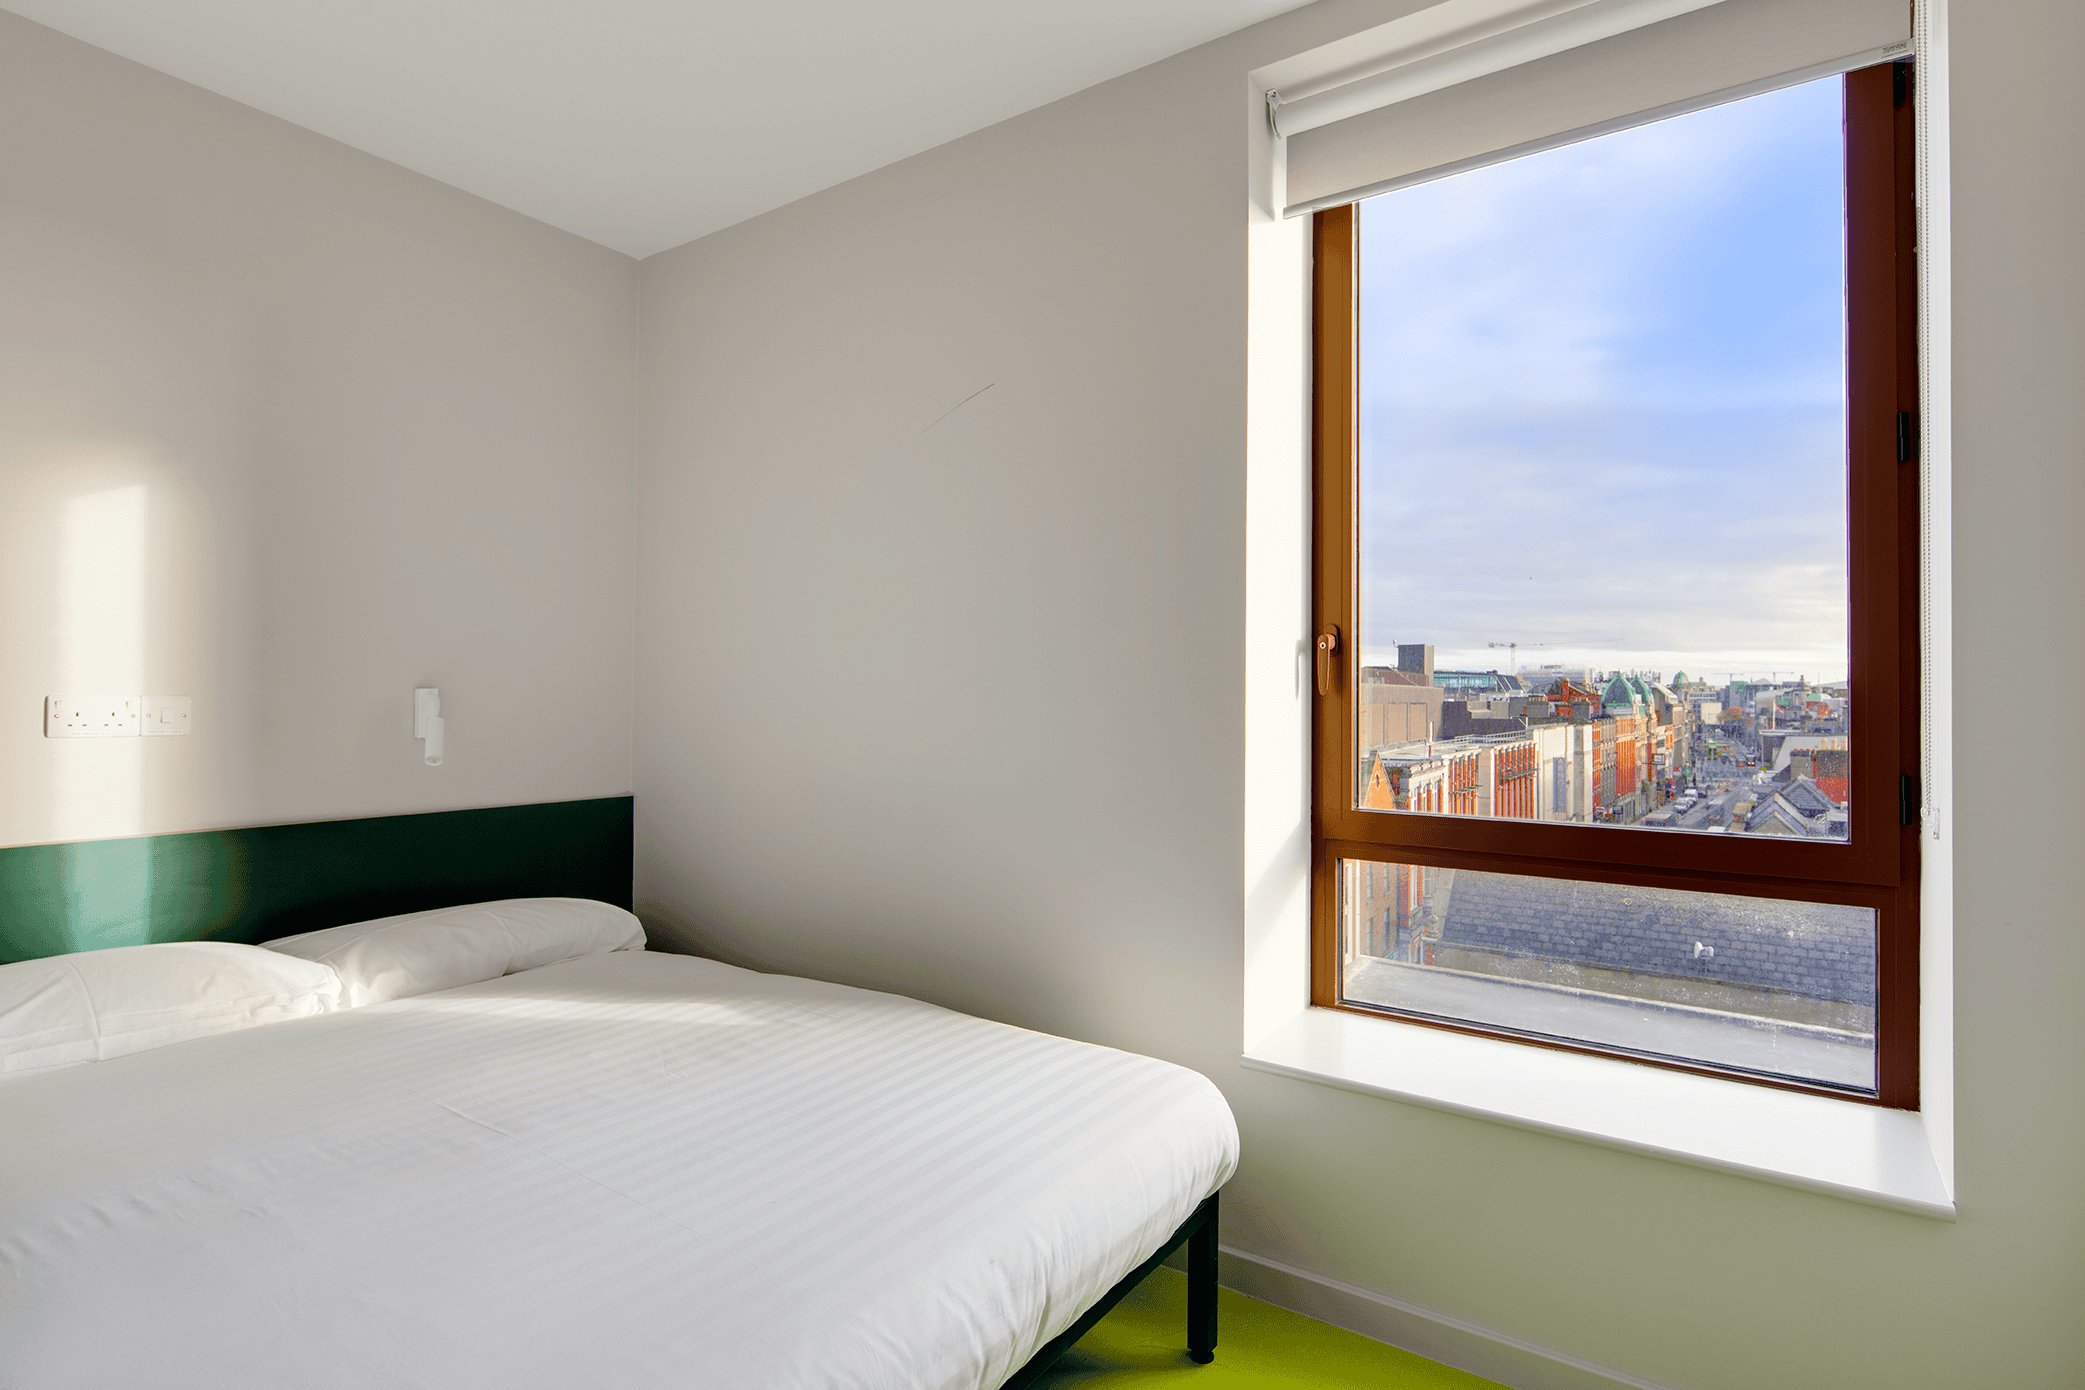 Clink i Lár hostel private room with double bed and views of Dublin city